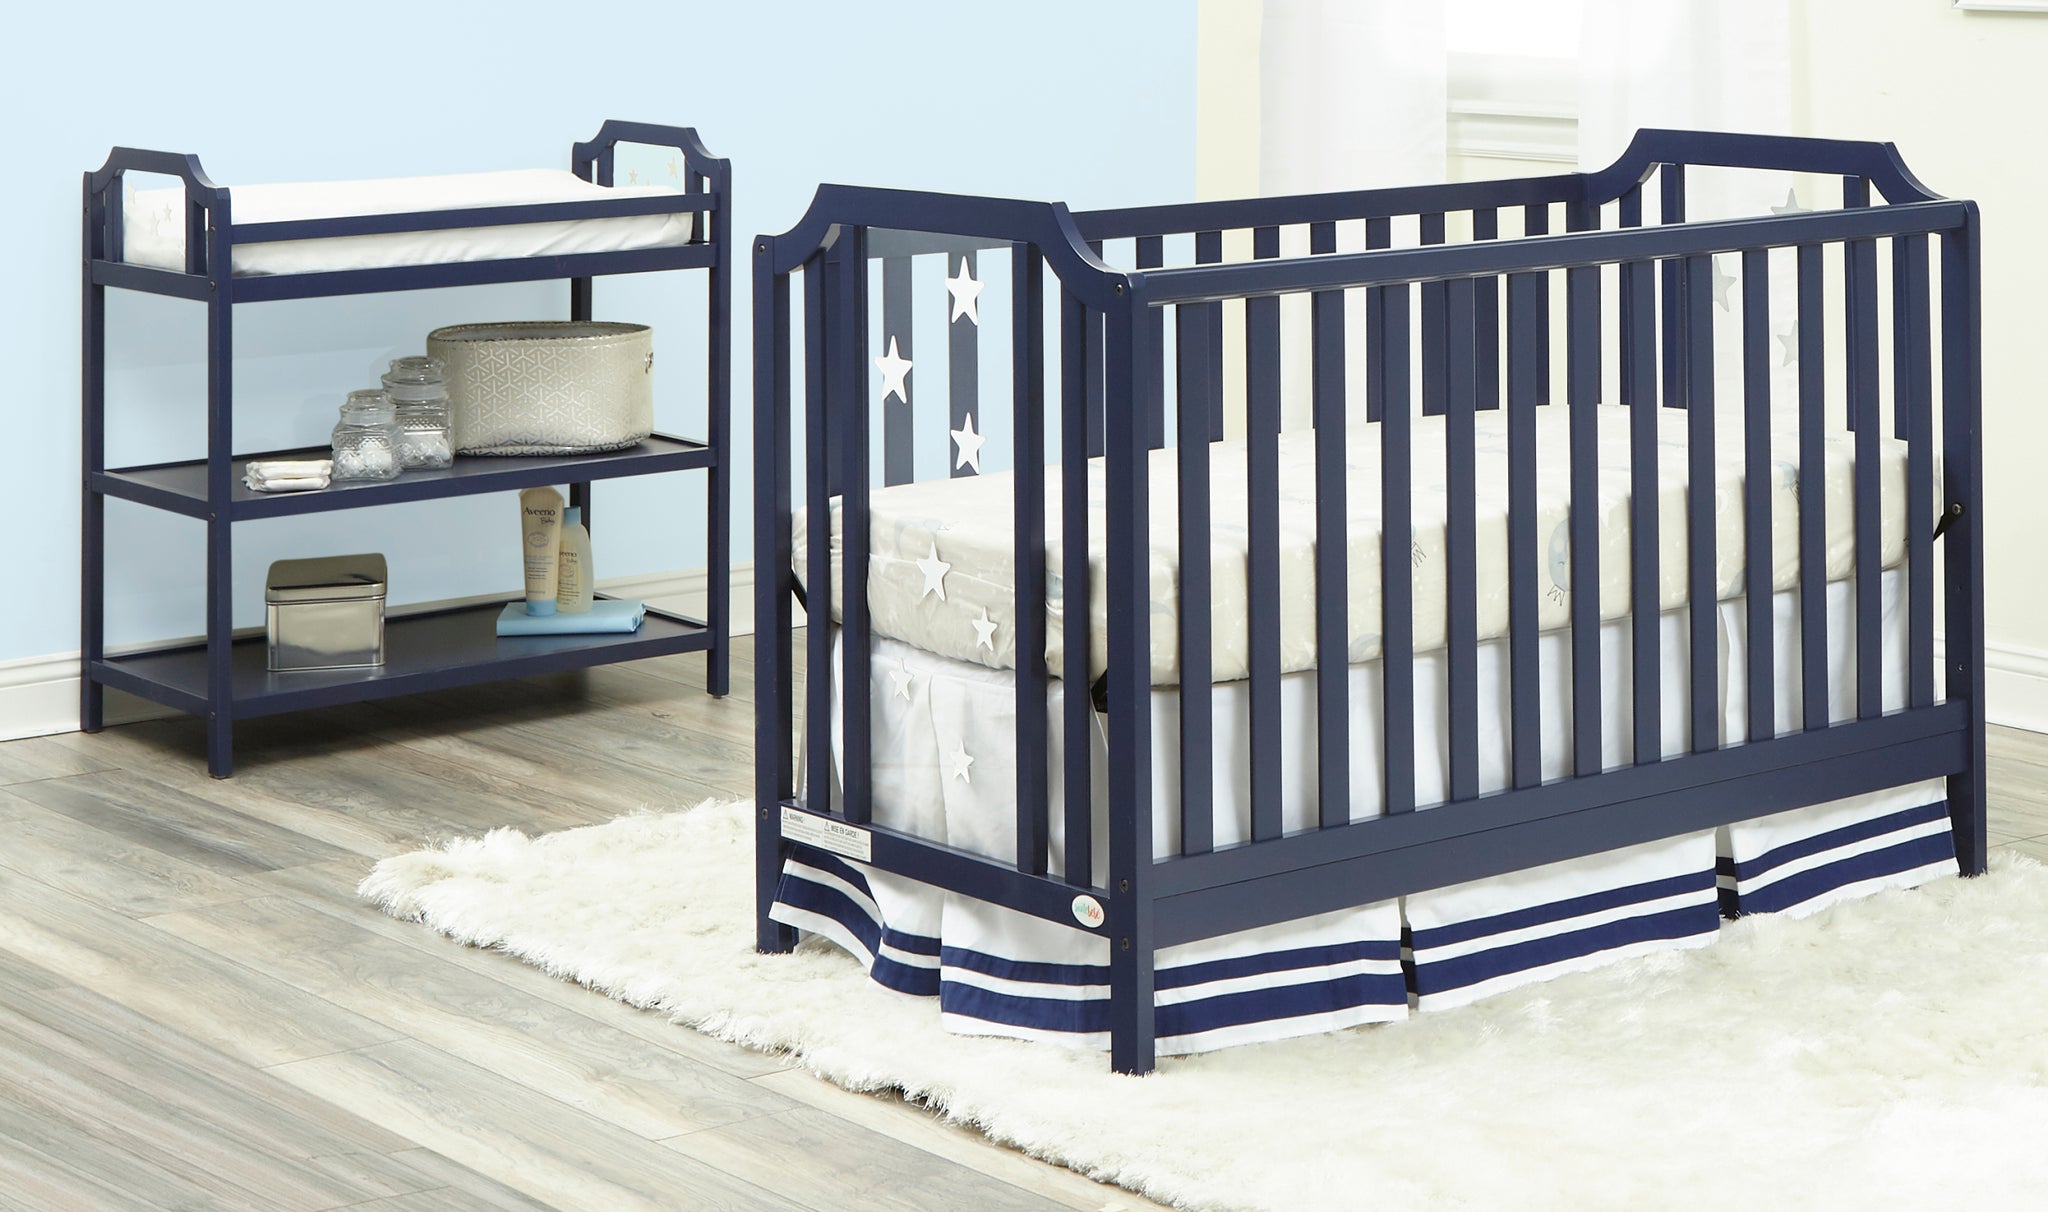 Celeste 3 in 1 Convertible Island Crib Navy Blue navy blue-solid wood